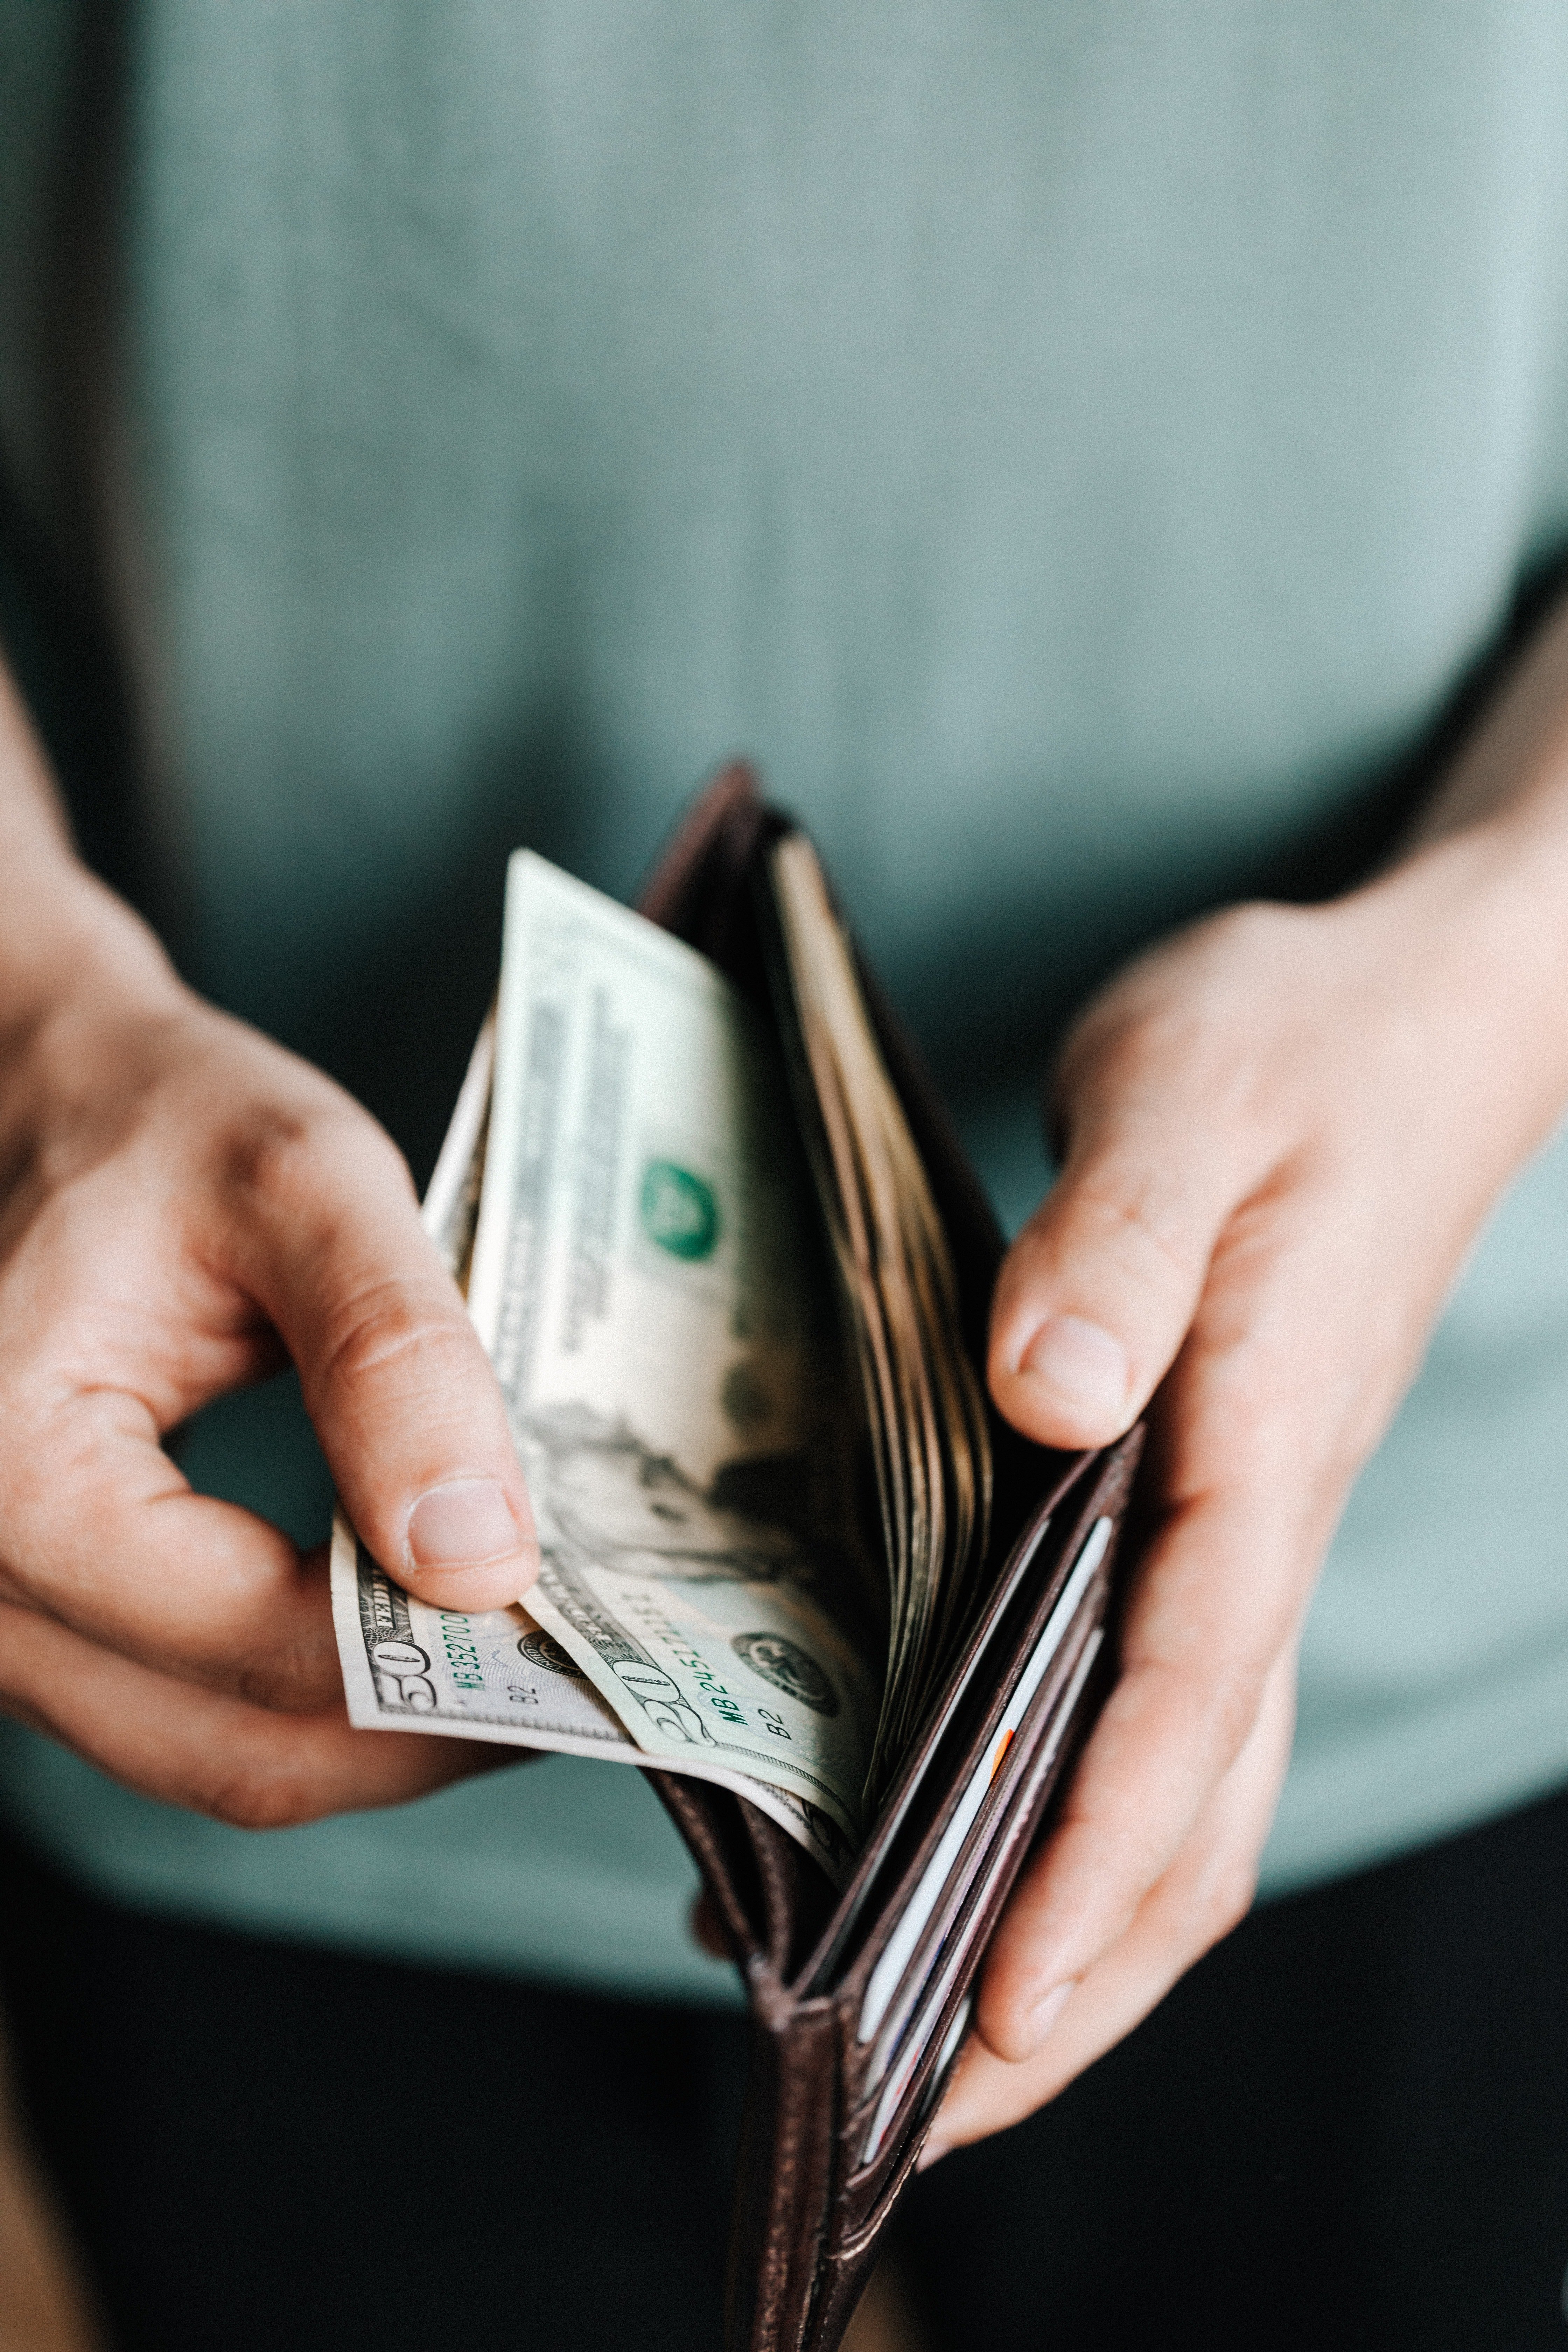 Jane knew that the missing money and her son's extracurricular activities after school were connected | Source: Pexels